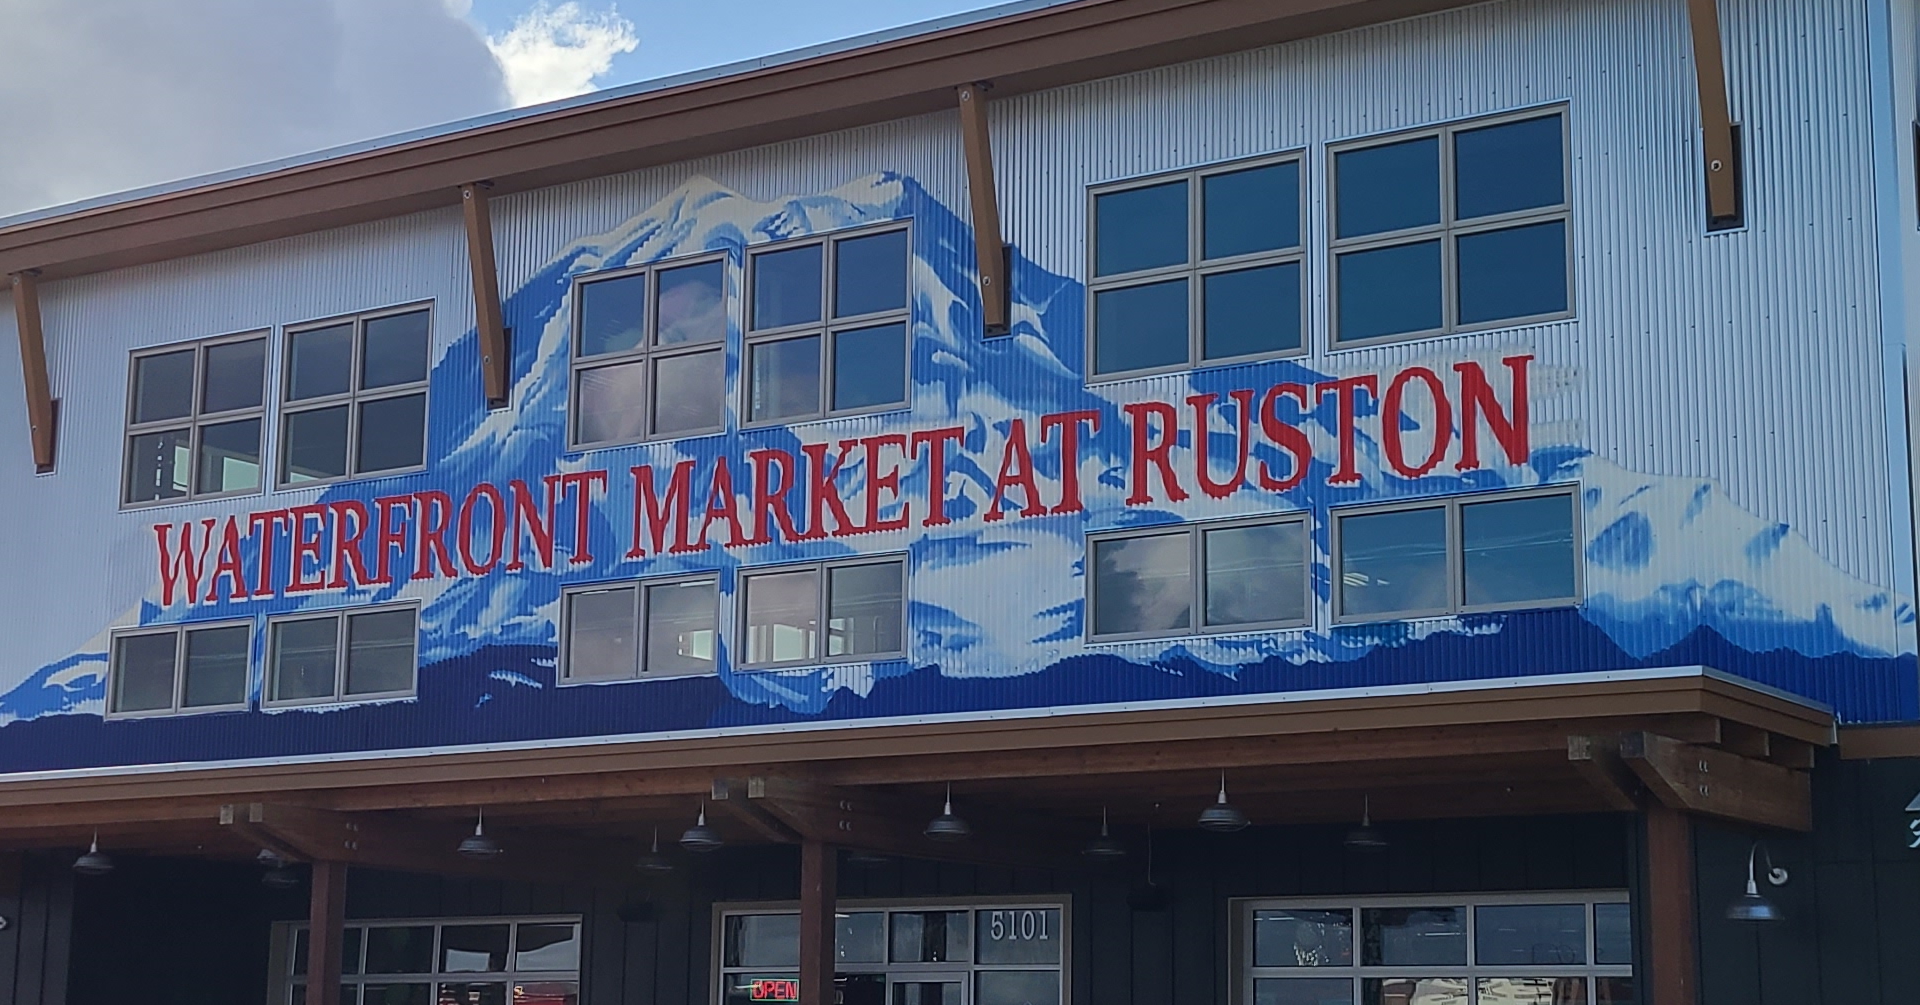 Events at Waterfront Market at Ruston